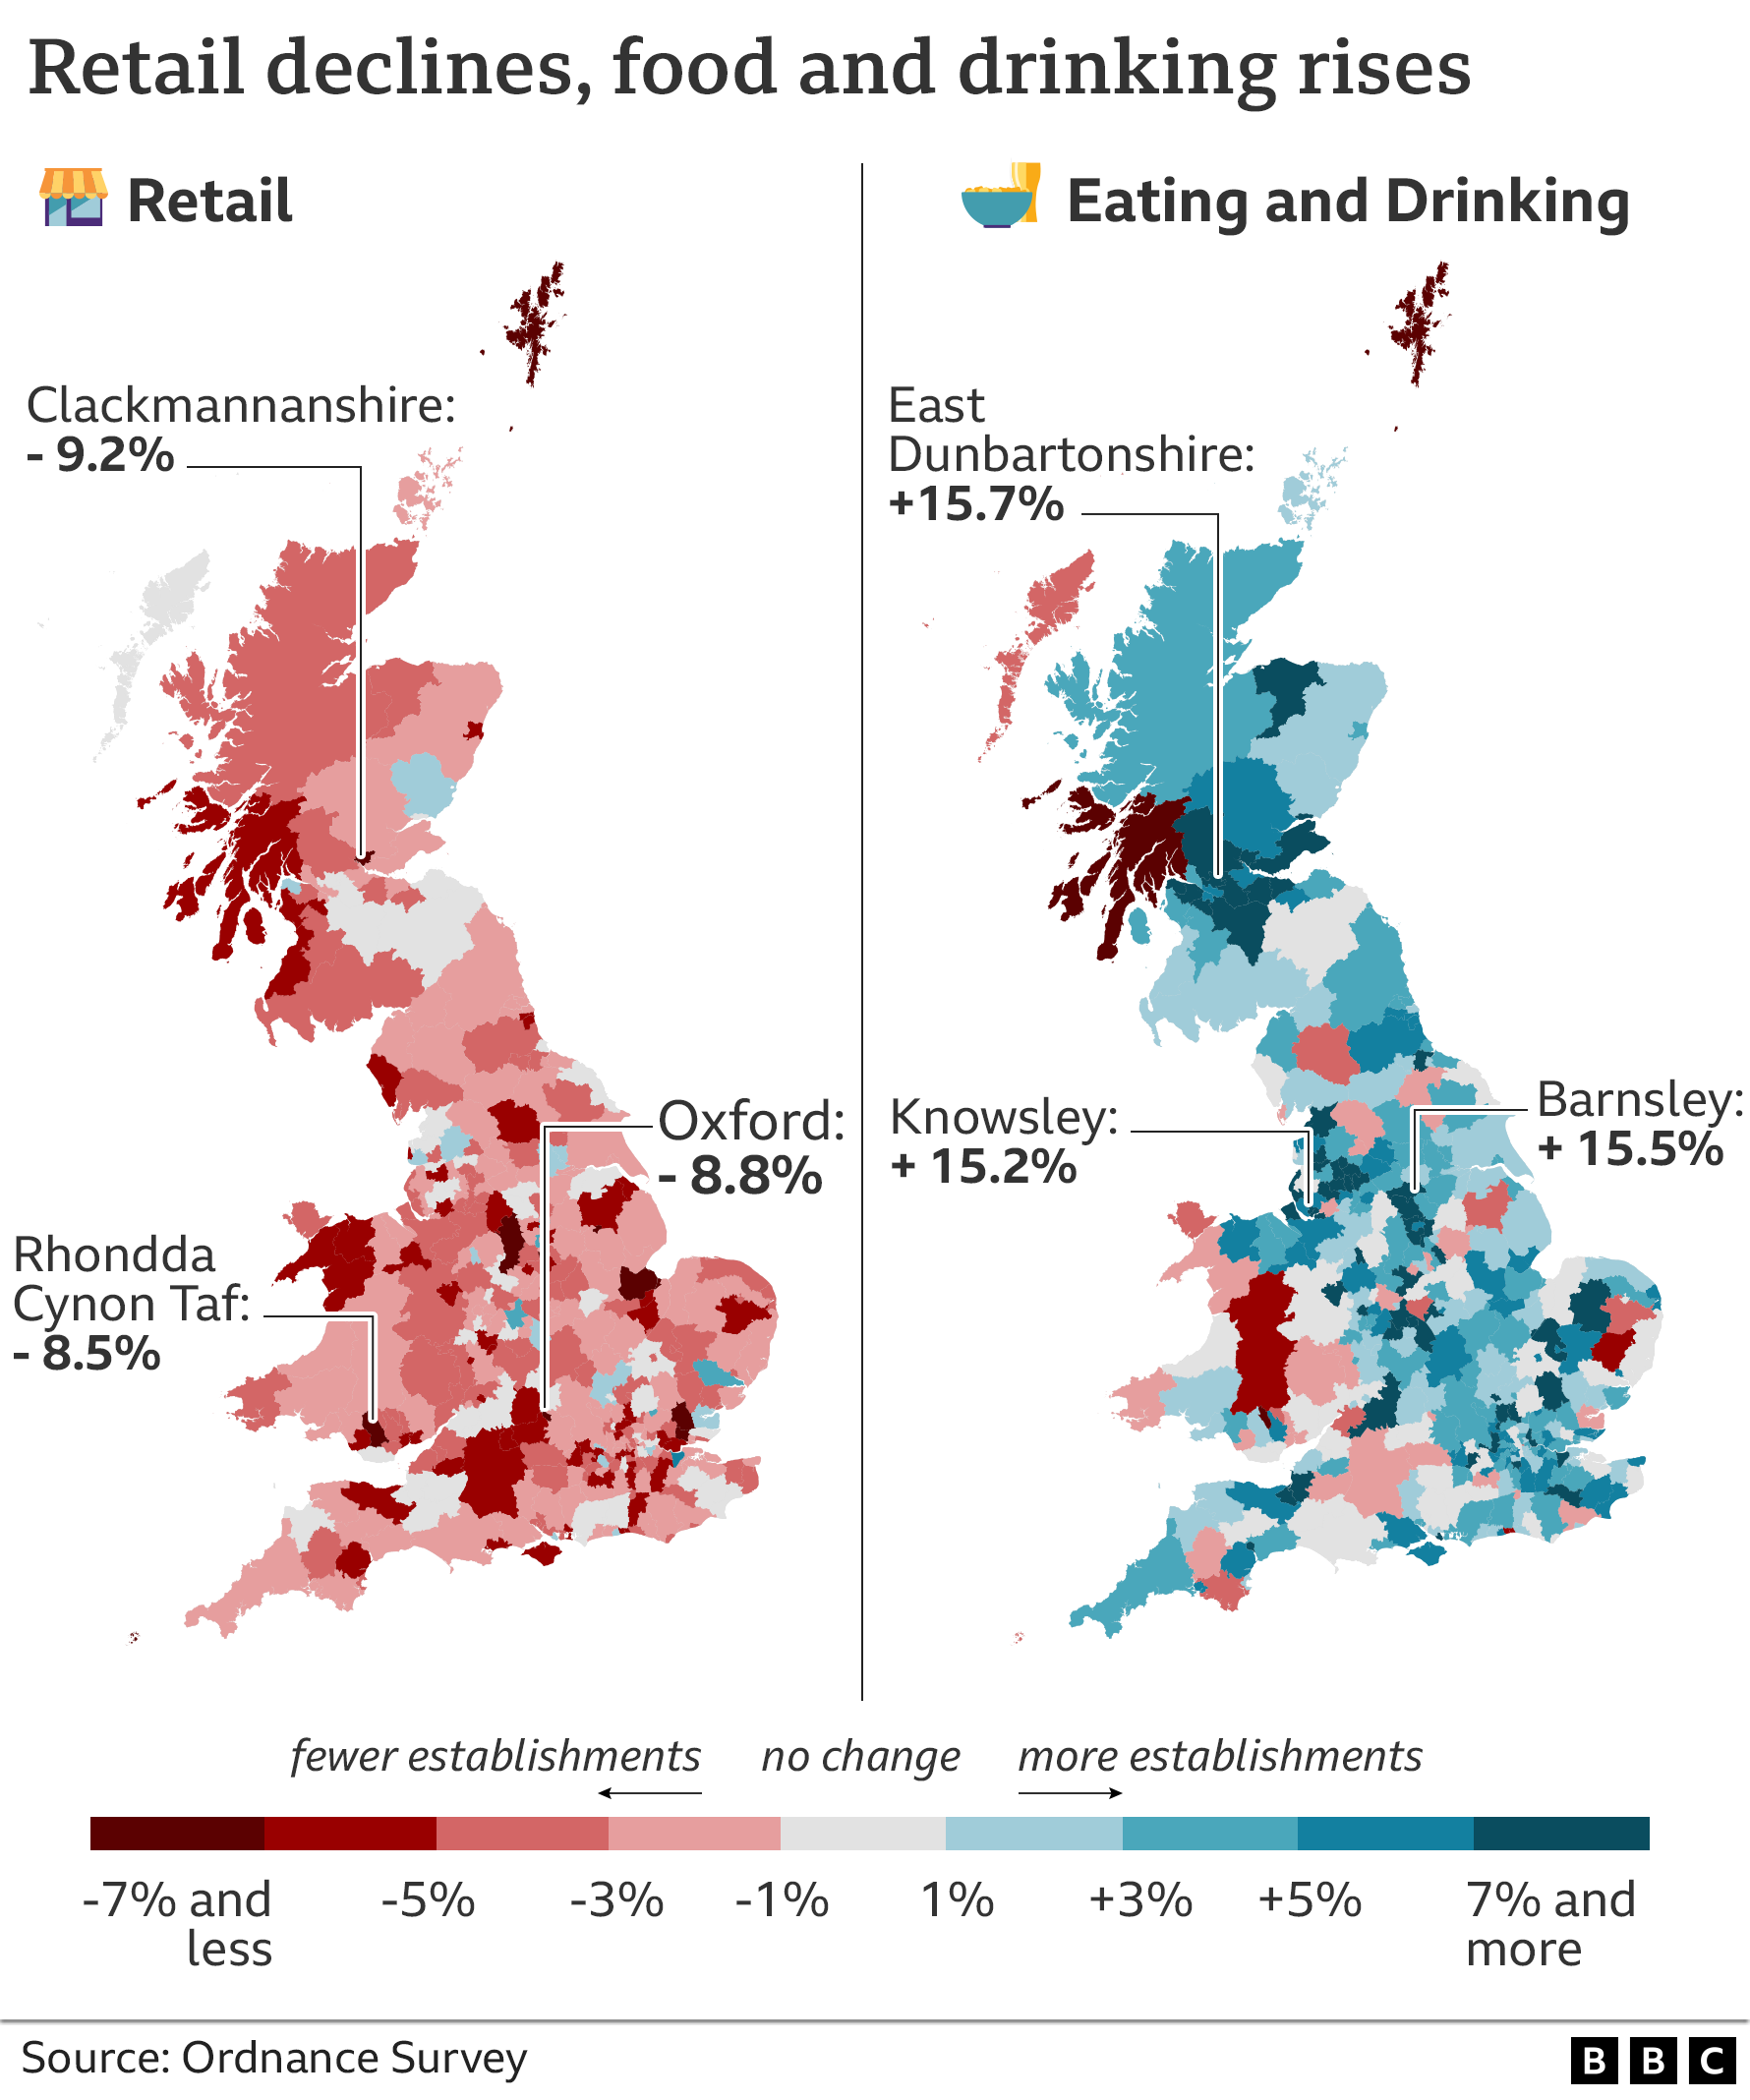 A set of maps of Great Britain showing how retail has declined in most local authorities, with the steepest declines in the Oxford (8.8% drop), Rhondda Cynon Tad with 8.5% drop and Clackmannashire with a decline of 9.2%. In eating and drinking, the map shows a general rise across Great Britain, with East Dunbartonshire registering an increase of 15.7%, Knowsley a rise of 15.2% and Barnsley an increase of 15.5%.